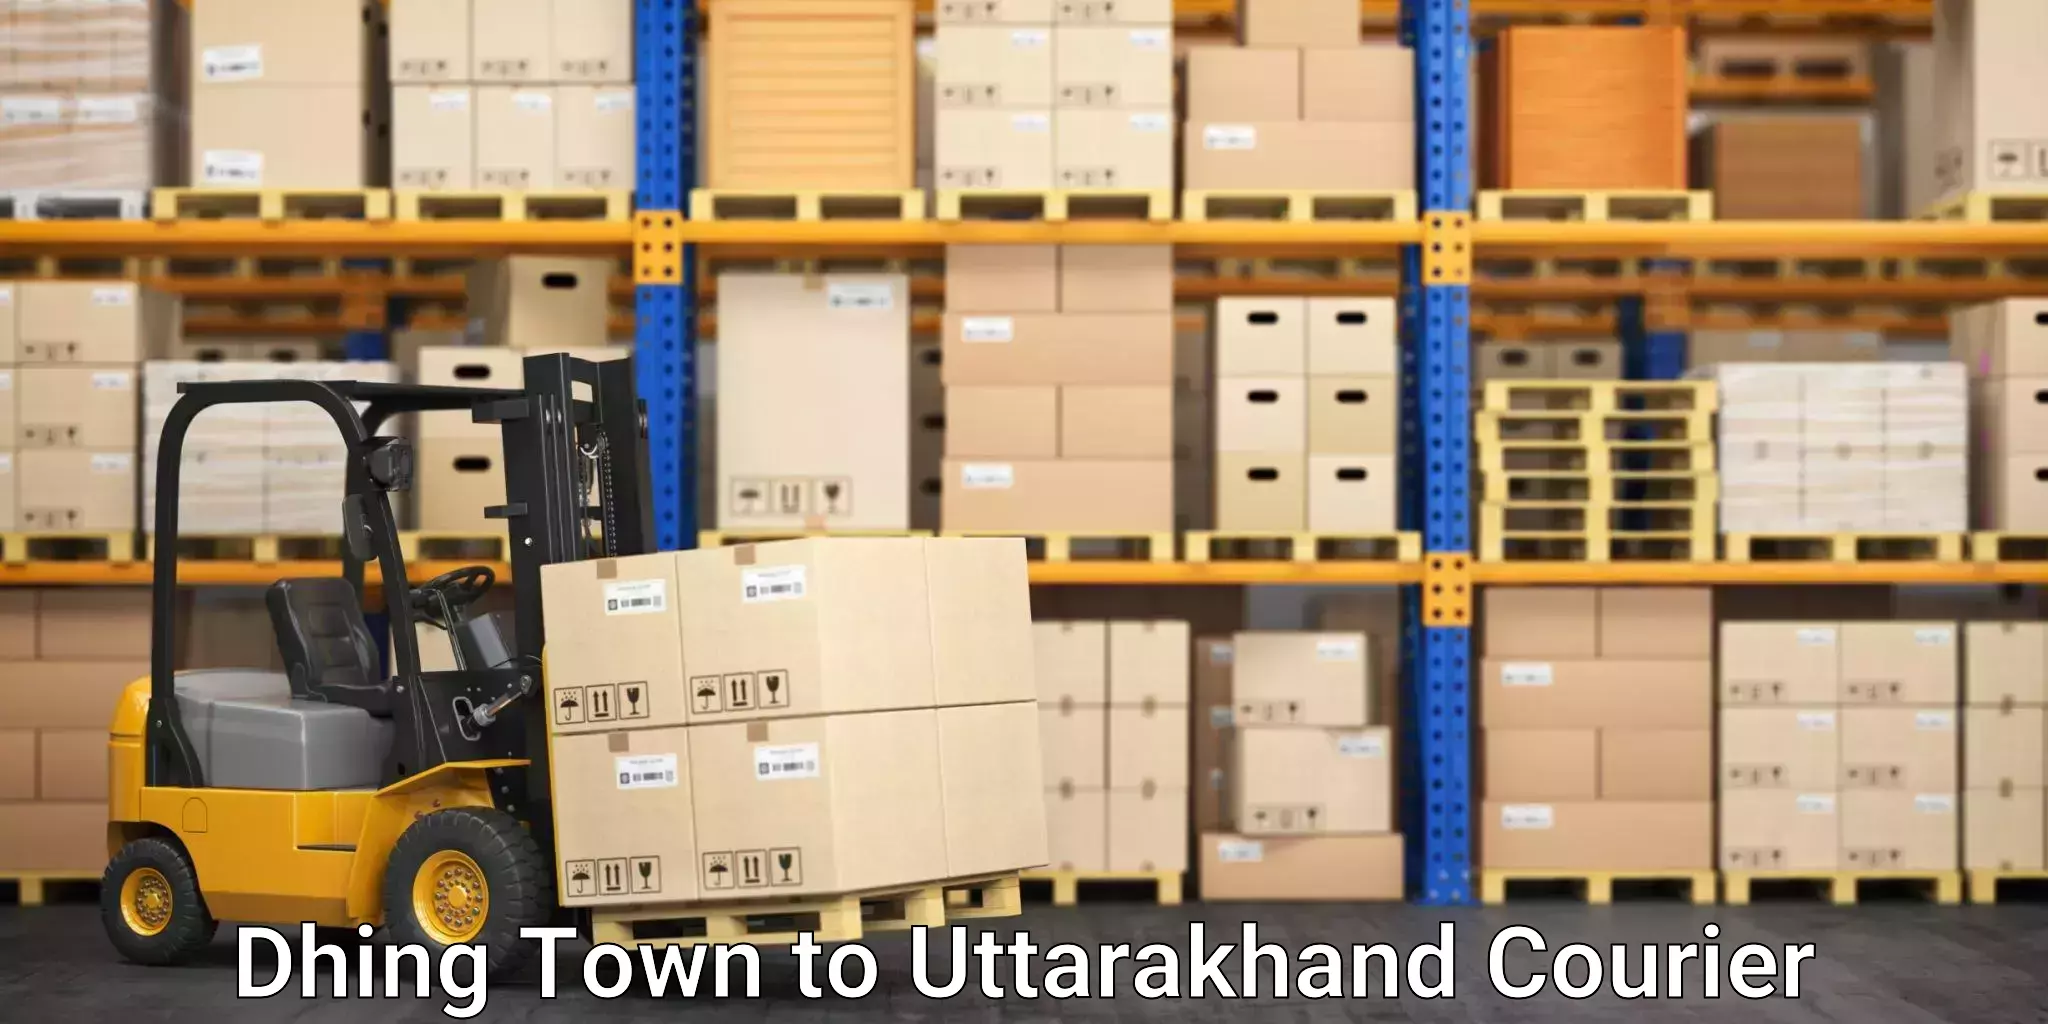 Rapid shipping services Dhing Town to Uttarakhand